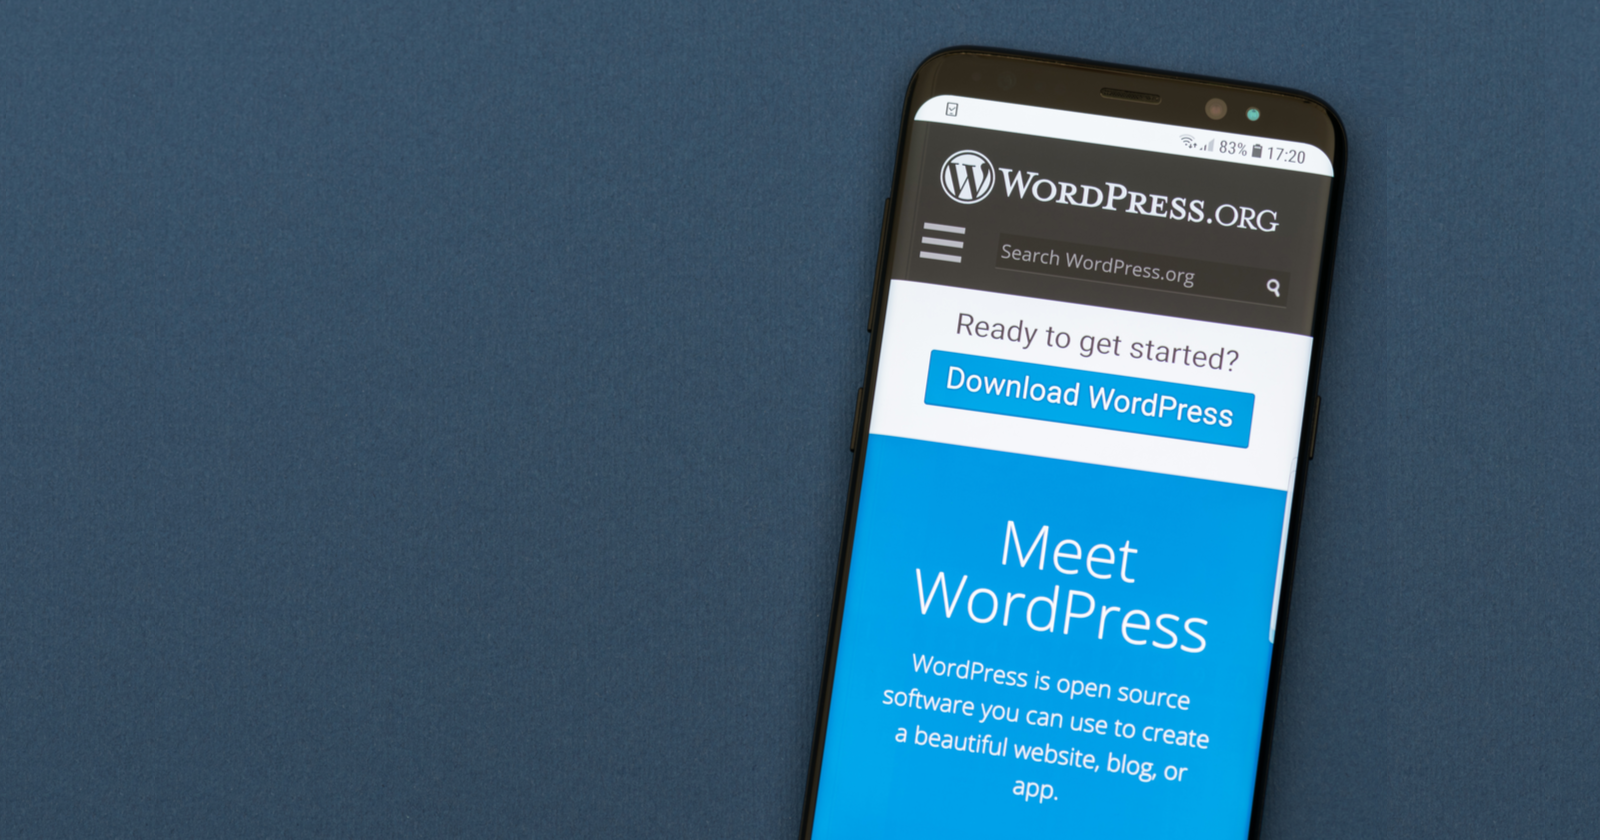 7-crucial-wordpress-plugins-for-blogs-businesses-5ee8b72552c5f.png